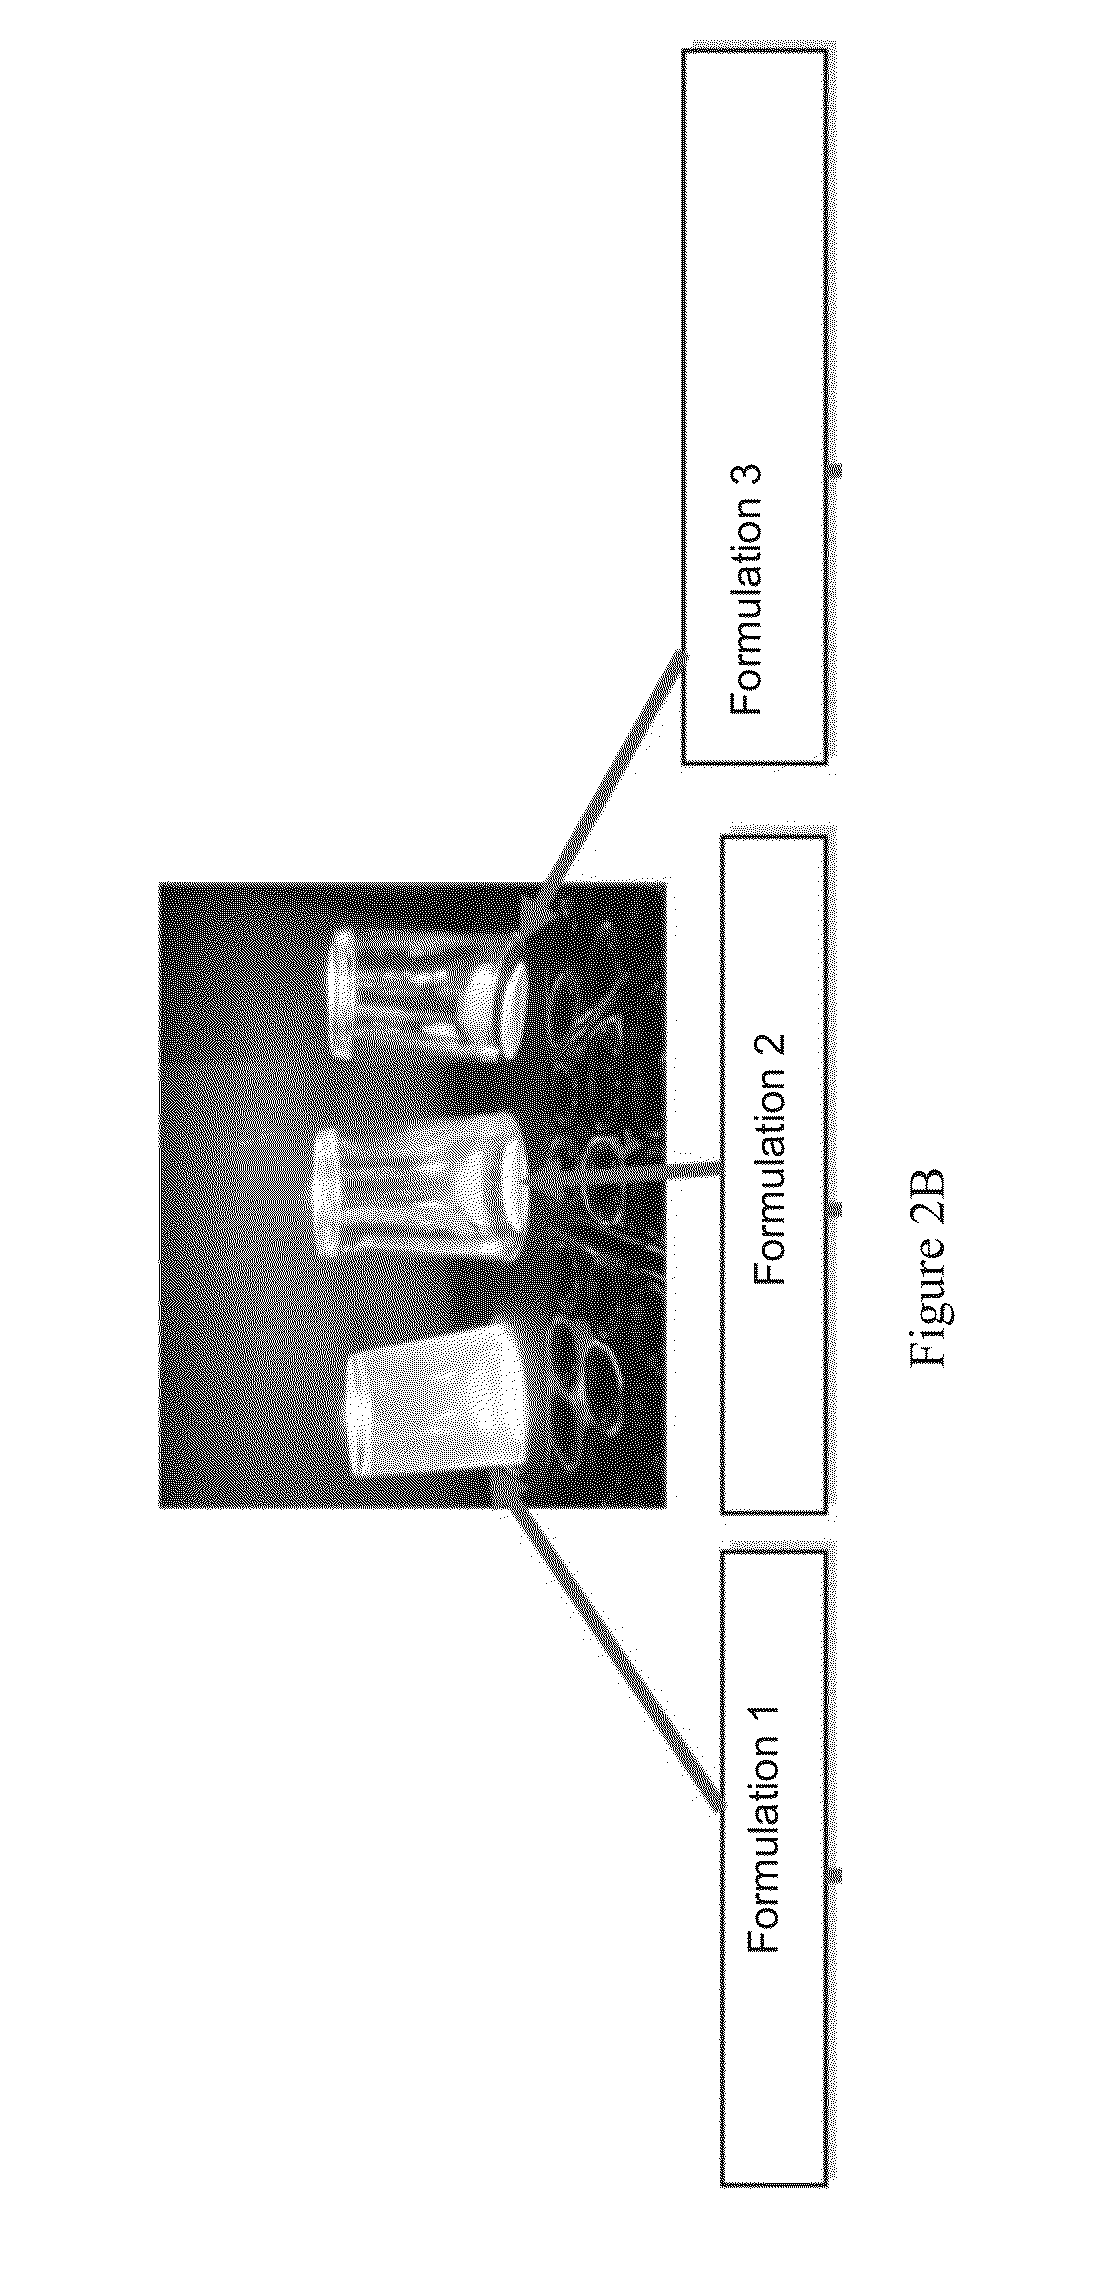 Scale-inhibition compositions and methods of making and using the same